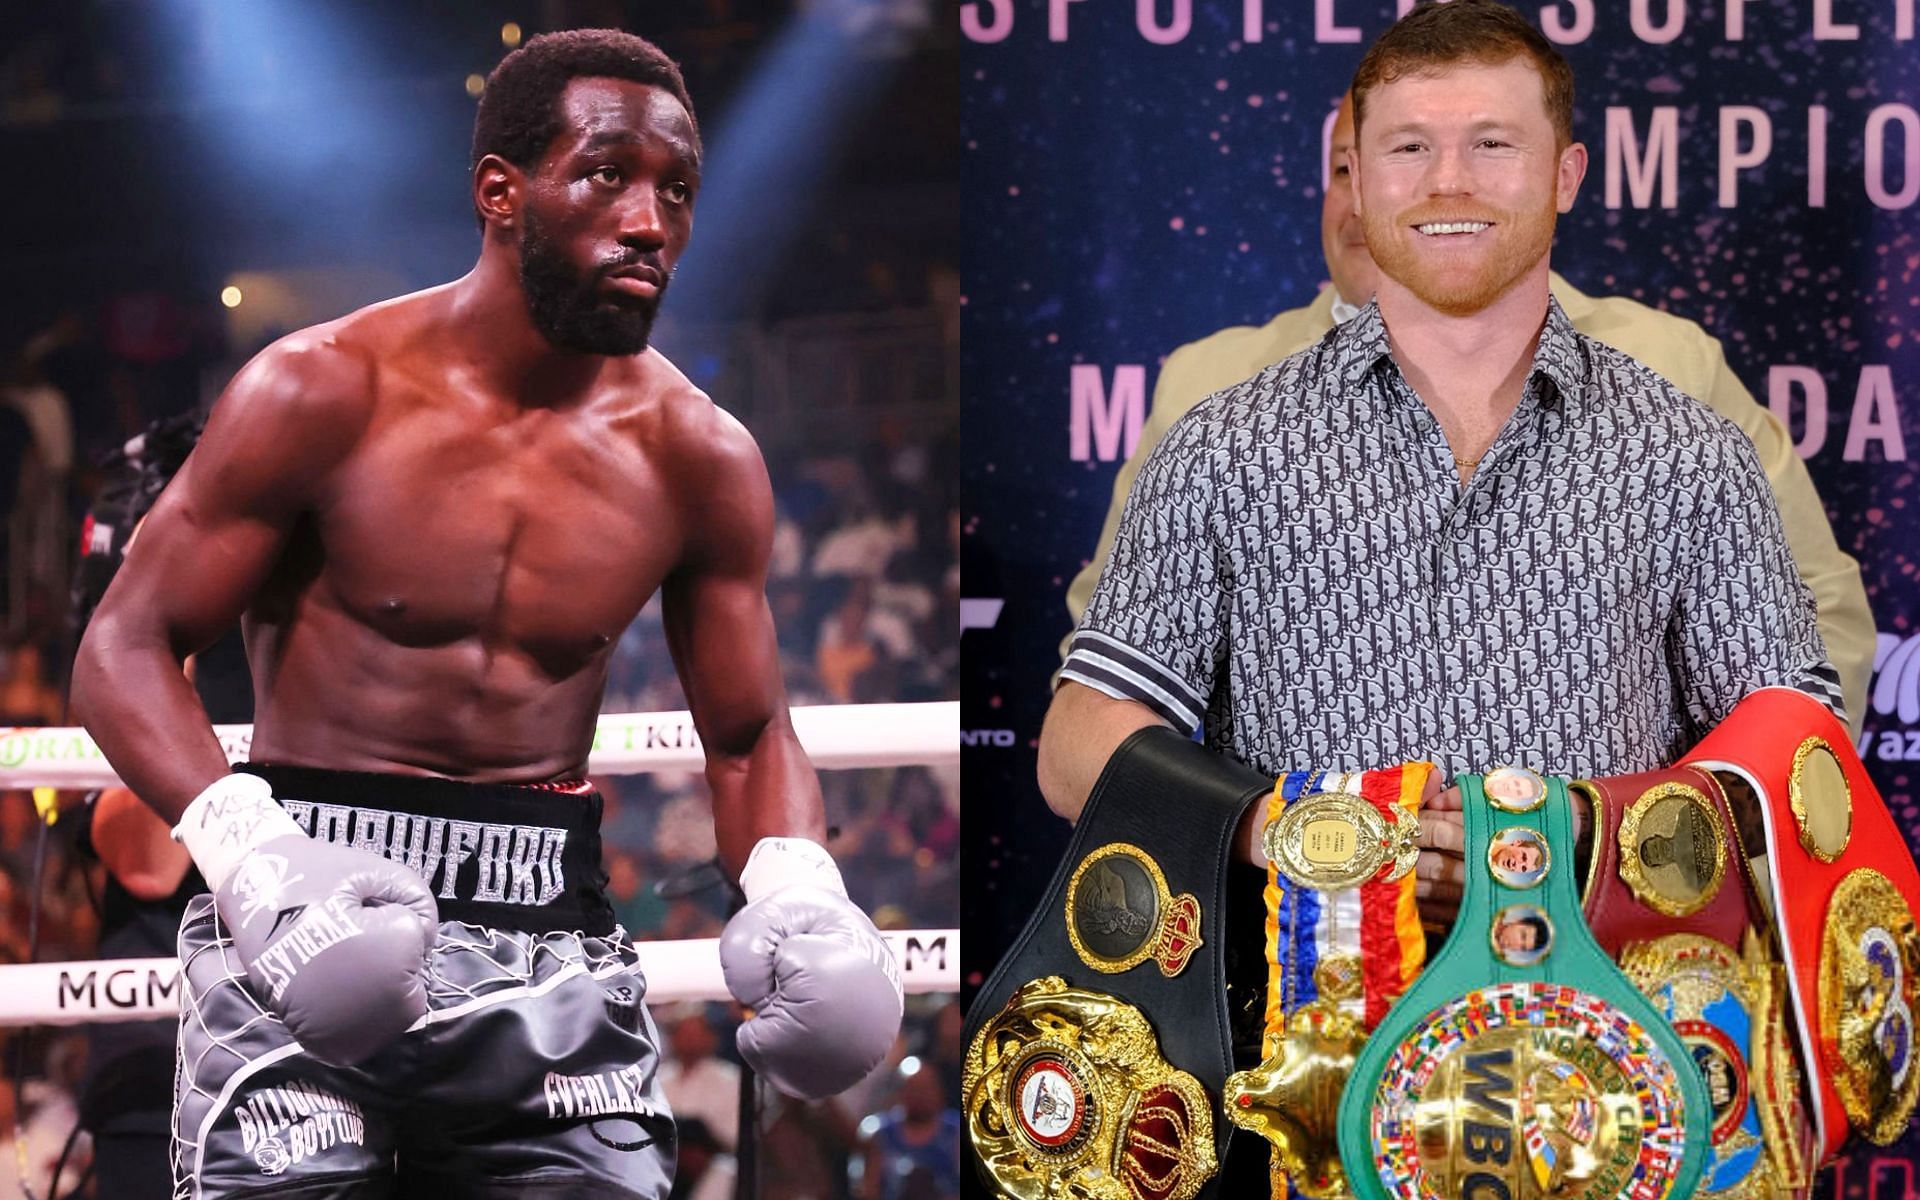 Terence Crawford (left) and Canelo Alvarez (right) [Images Courtesy: @GettyImages]